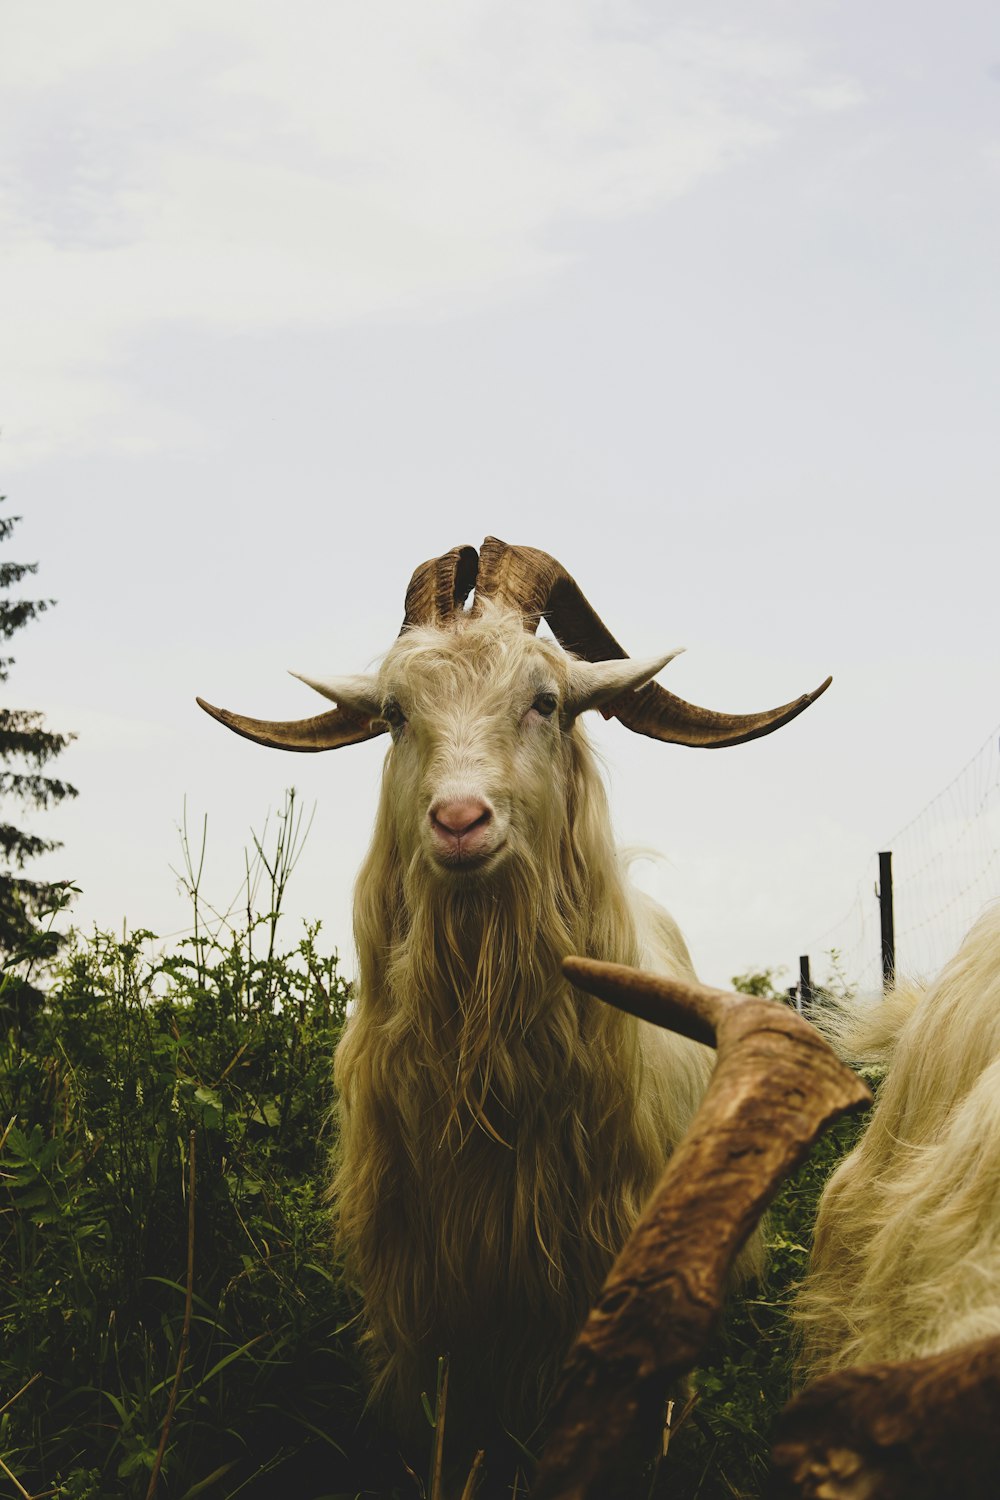 a goat with long horns standing in a field